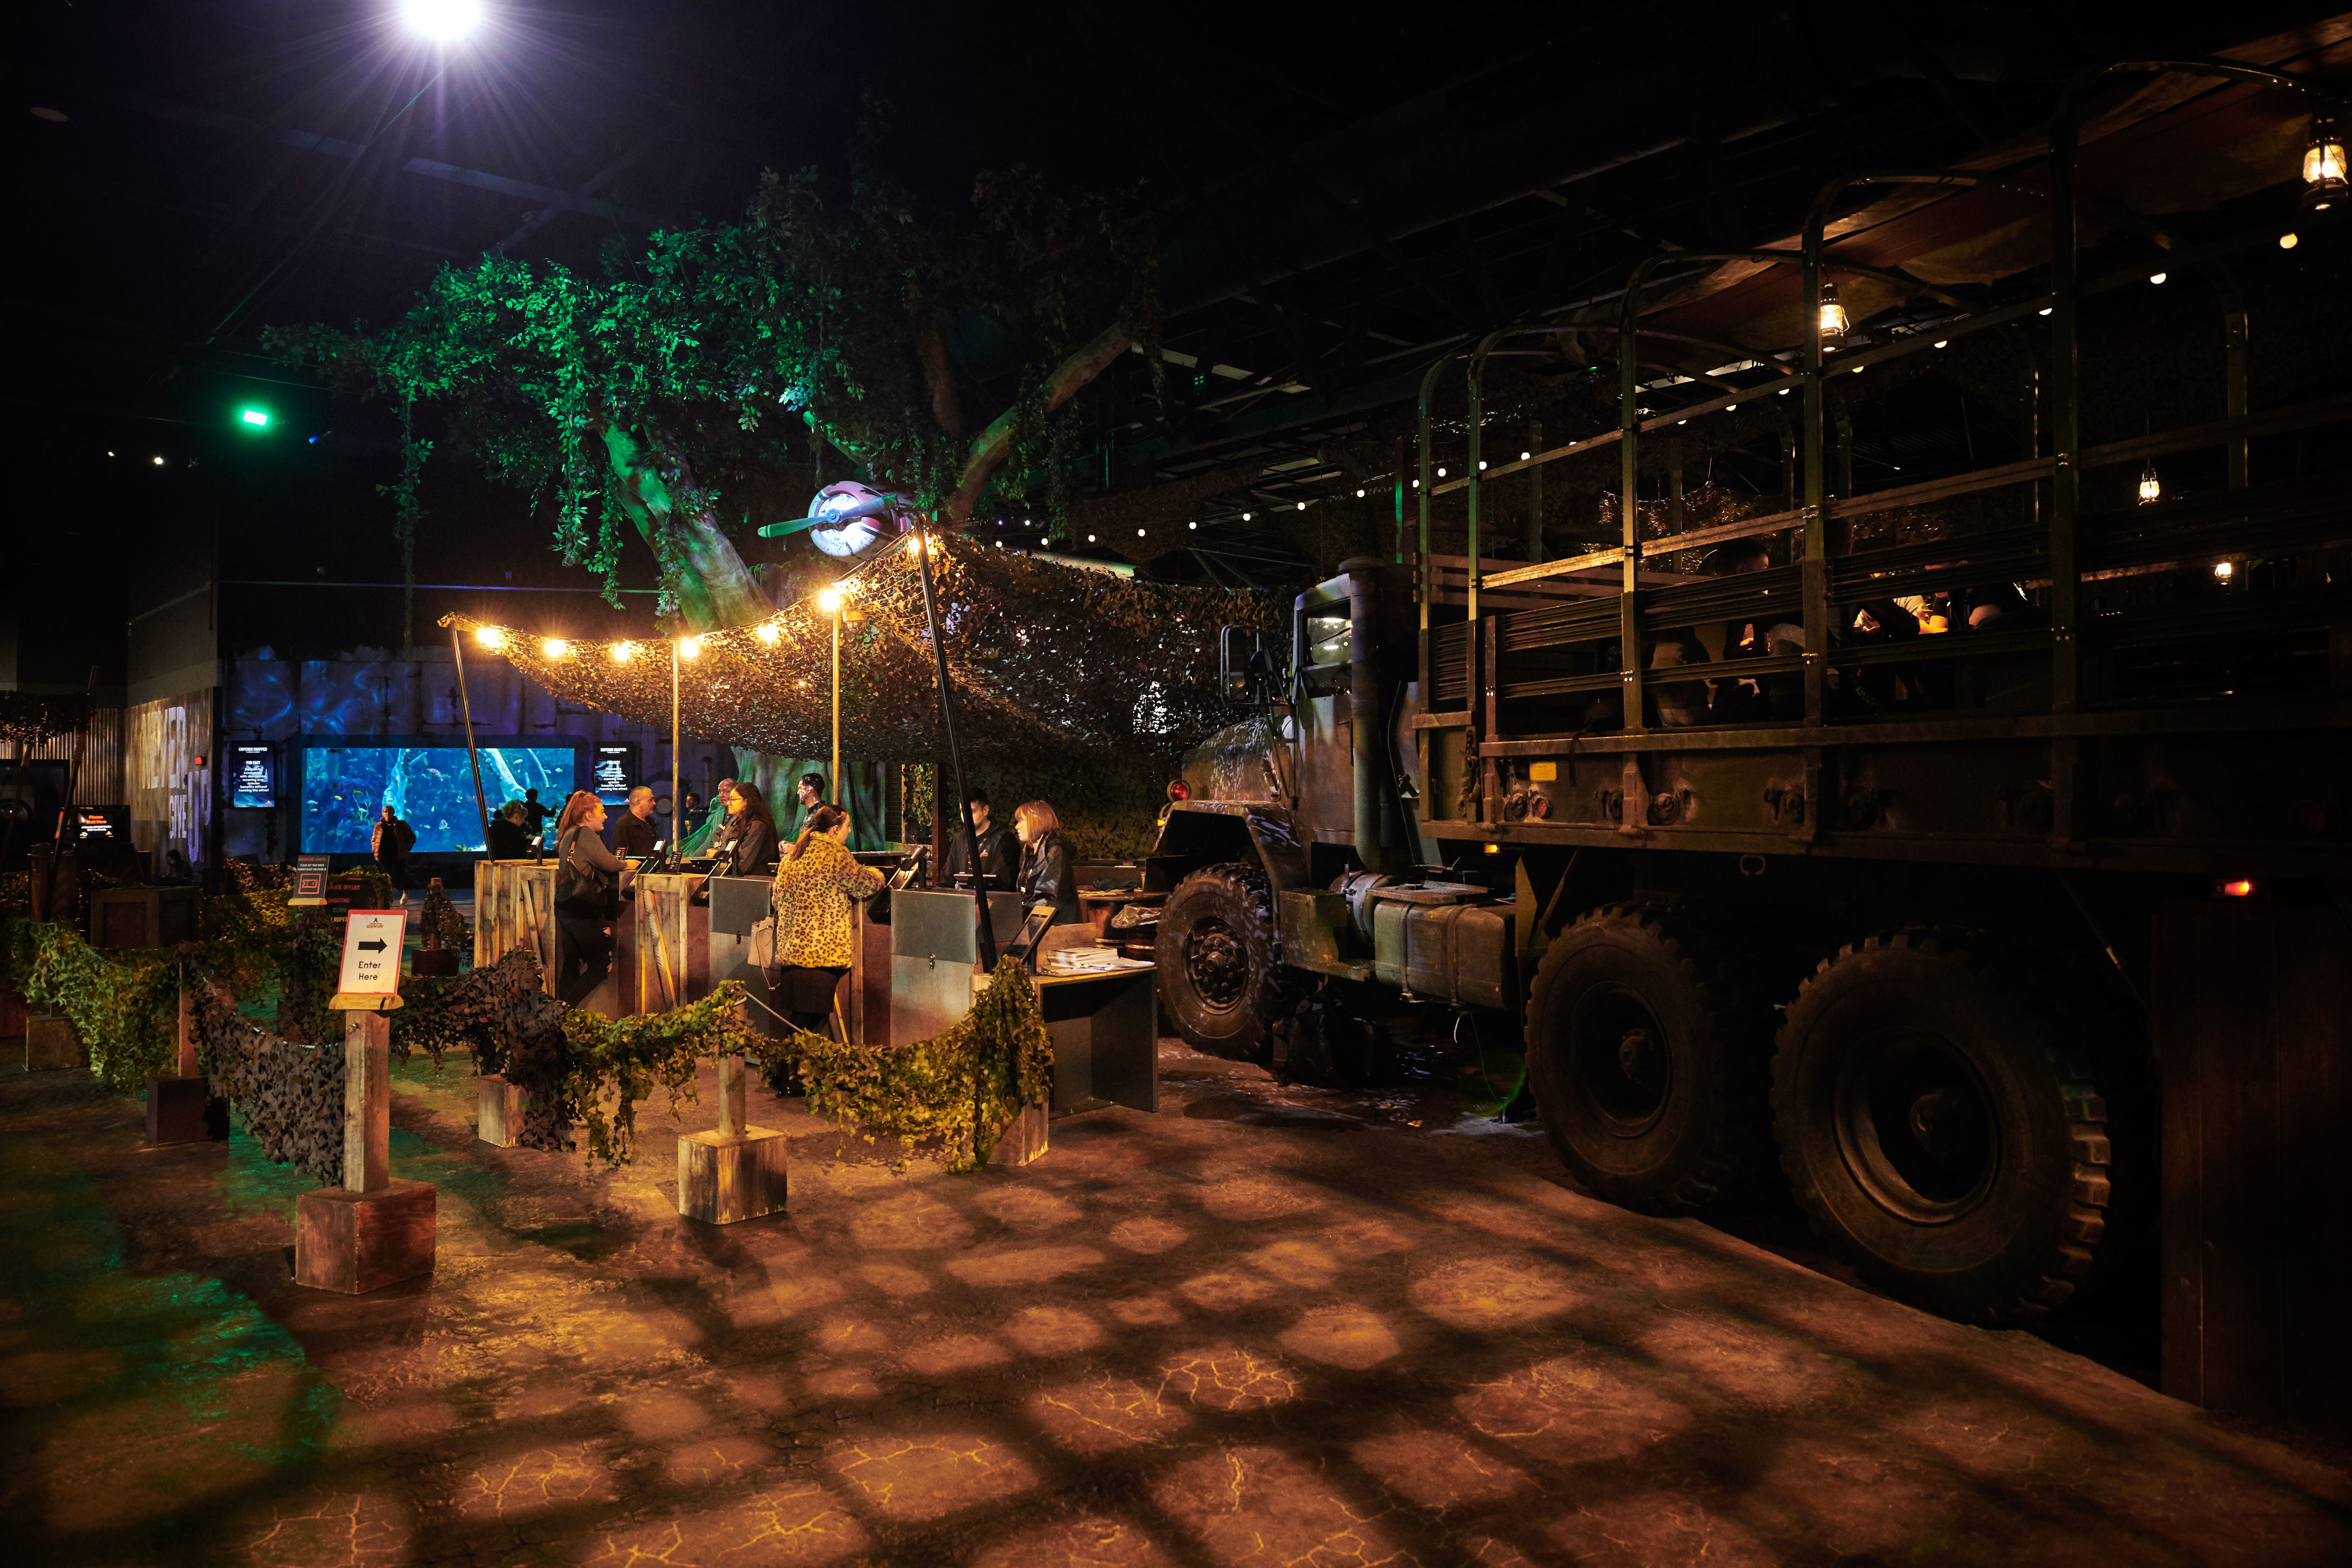 The Bear Grylls Adventure main admissions entrance area with army truck and rain forest tree